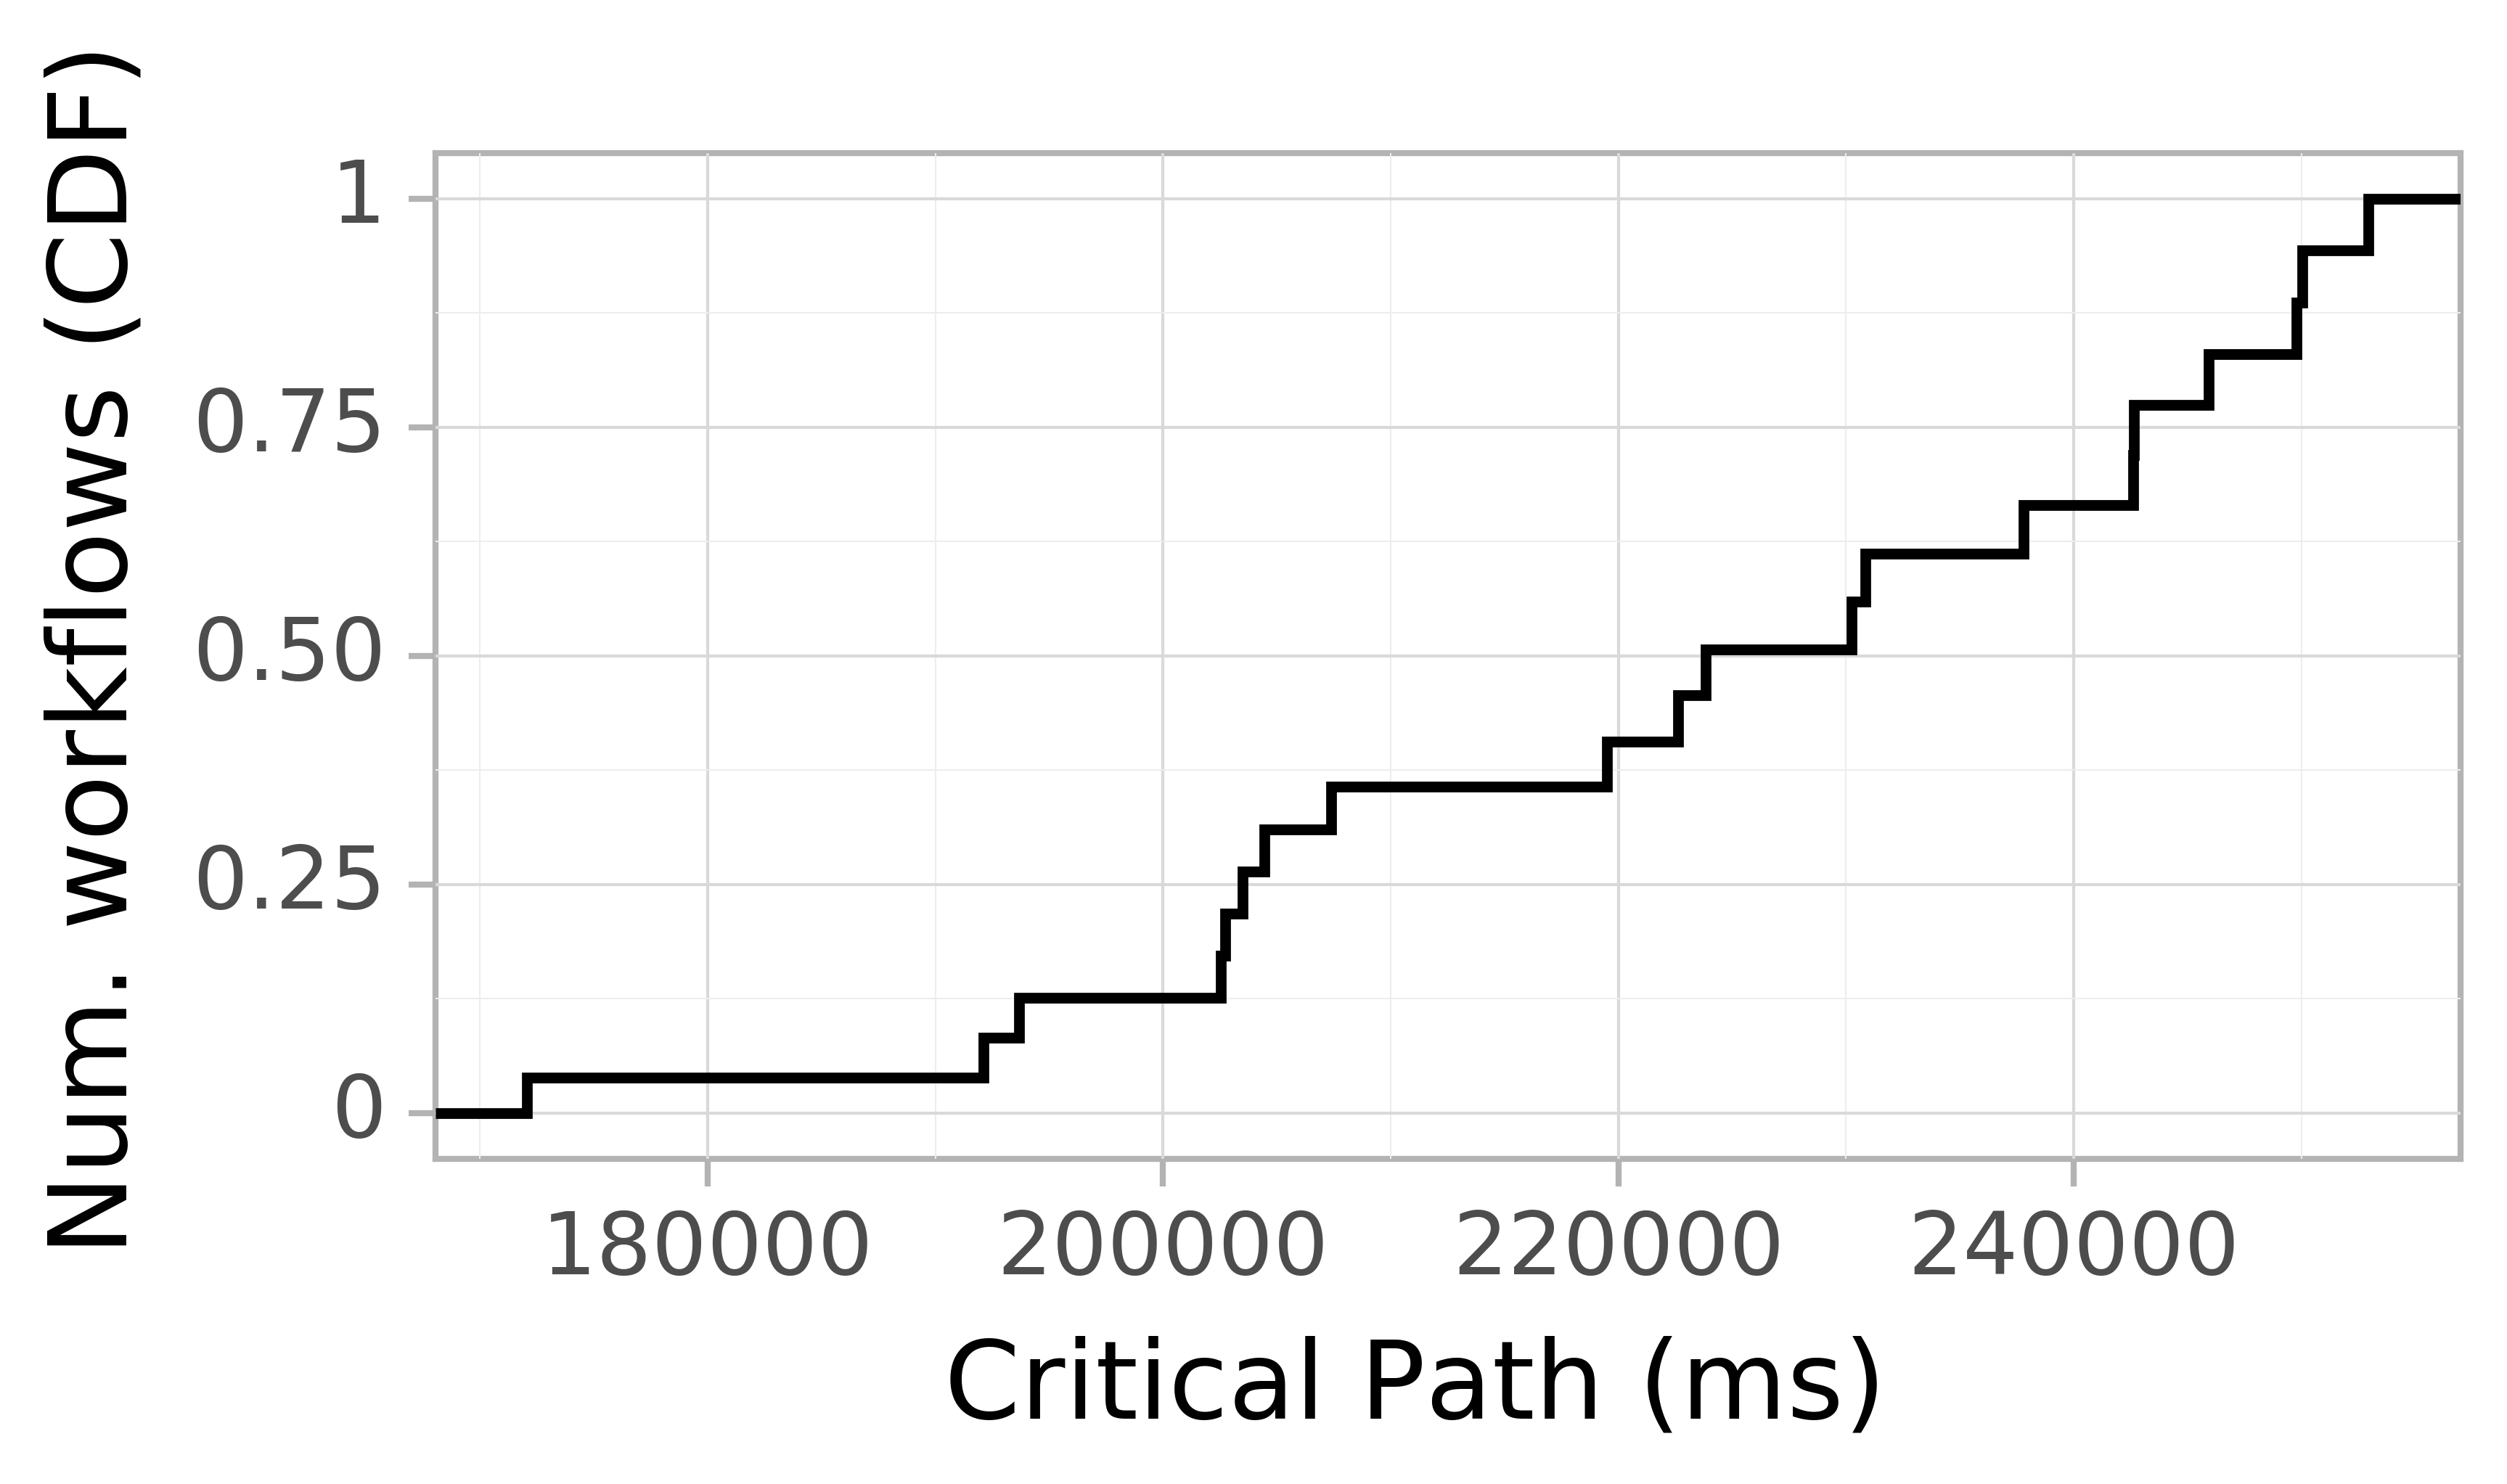 Job runtime CDF graph for the askalon-new_ee68 trace.